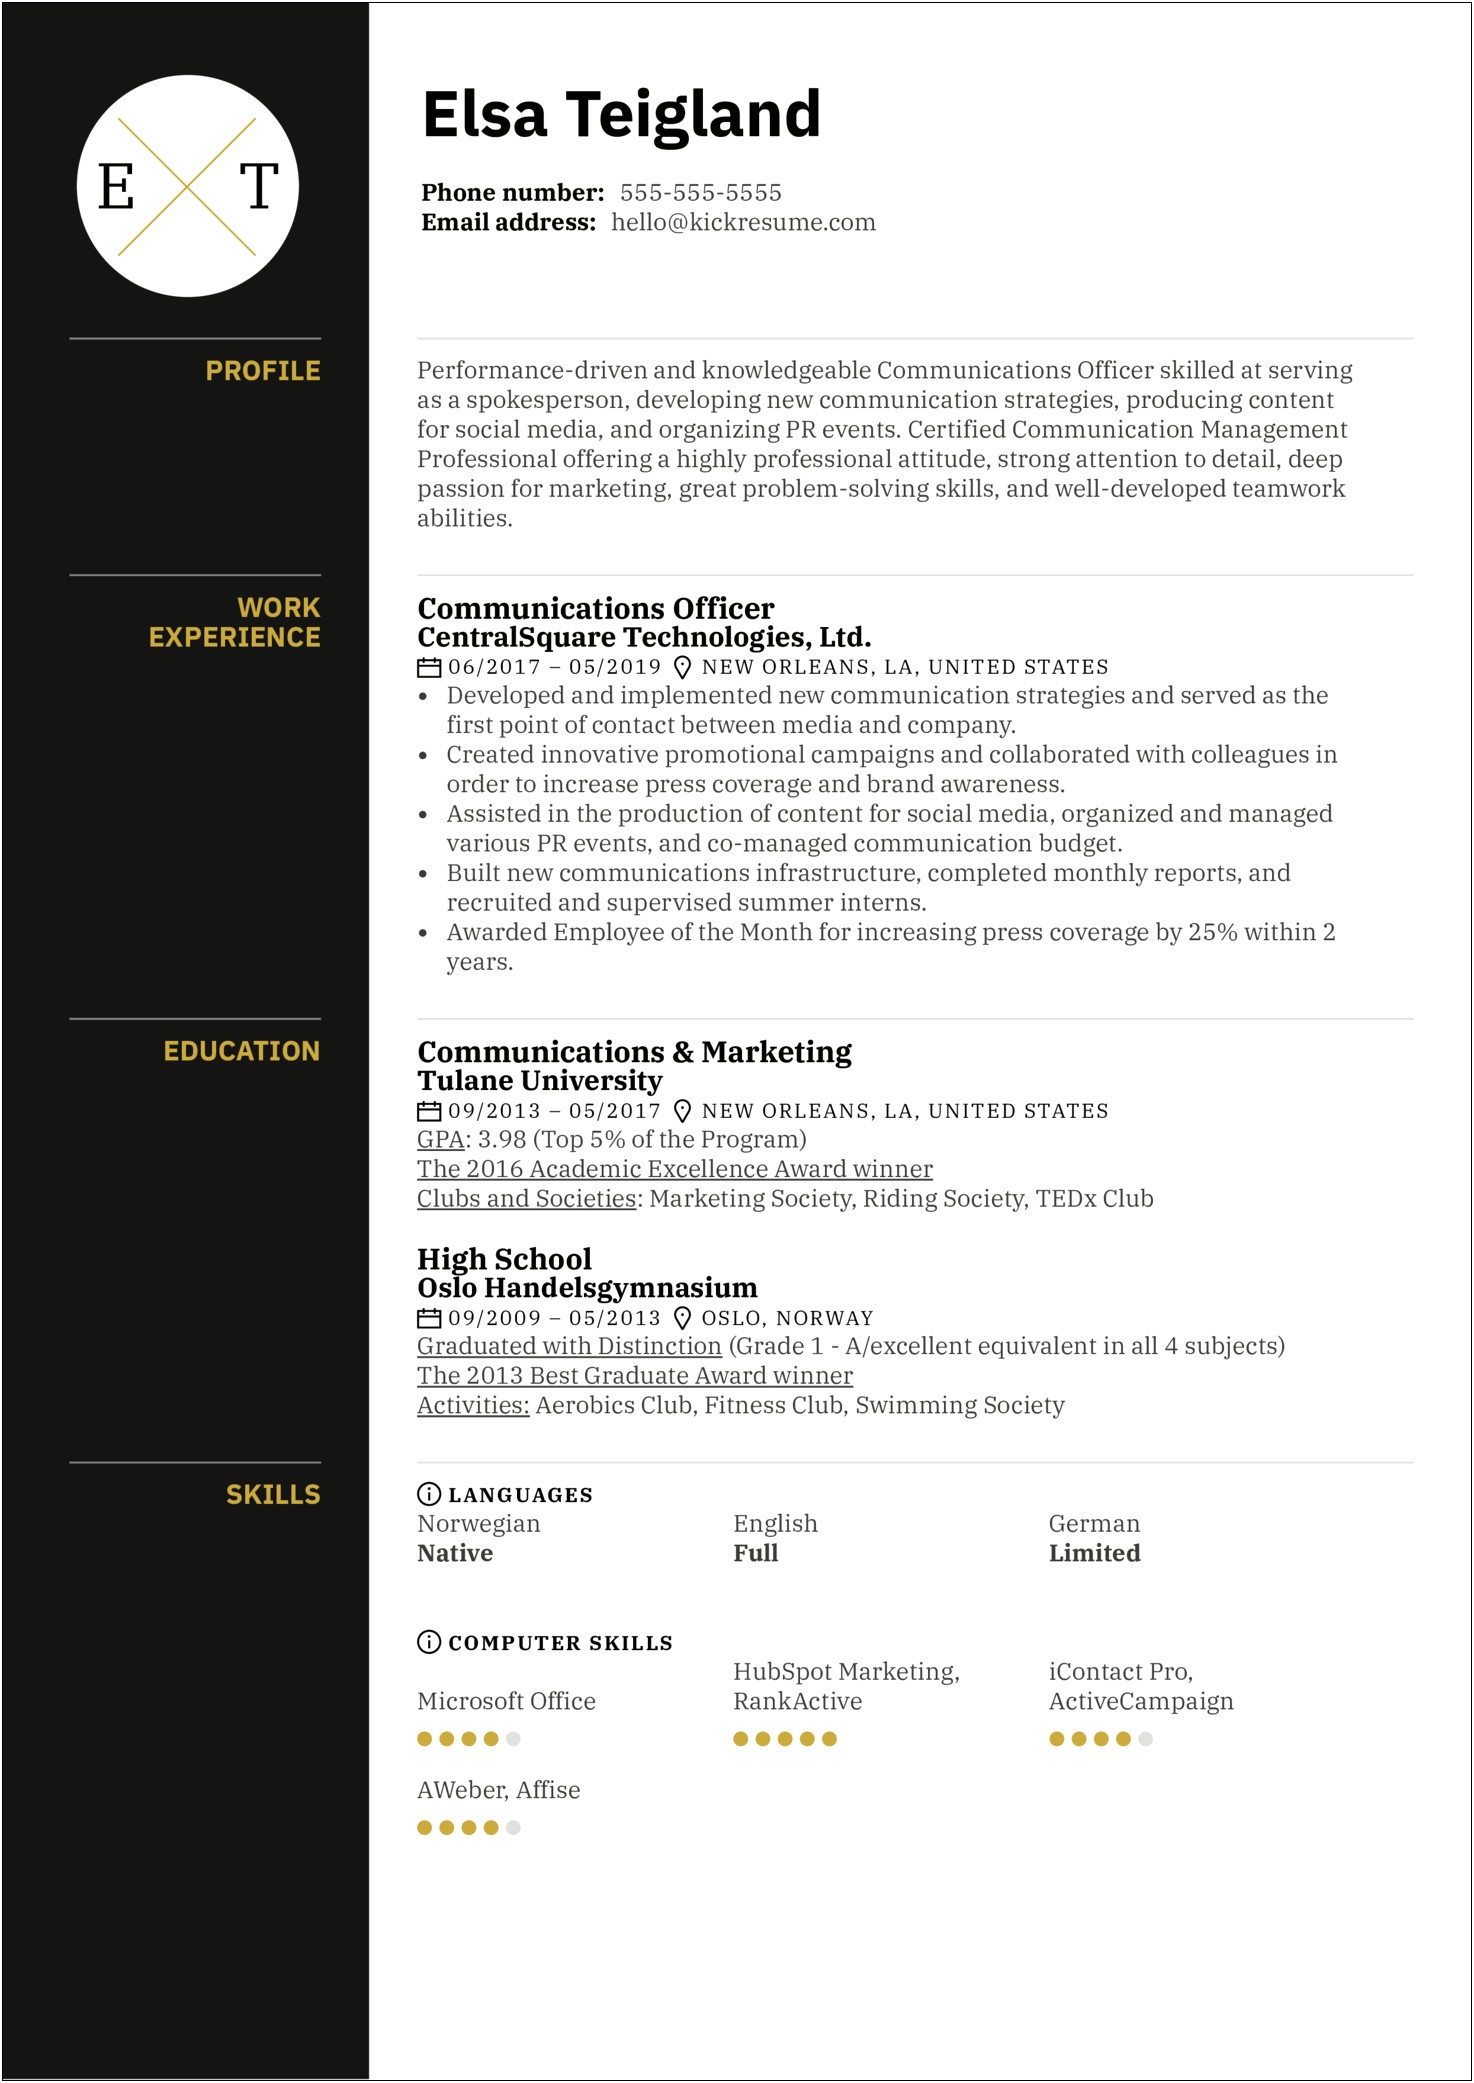 Sample Resume For Communications Professional